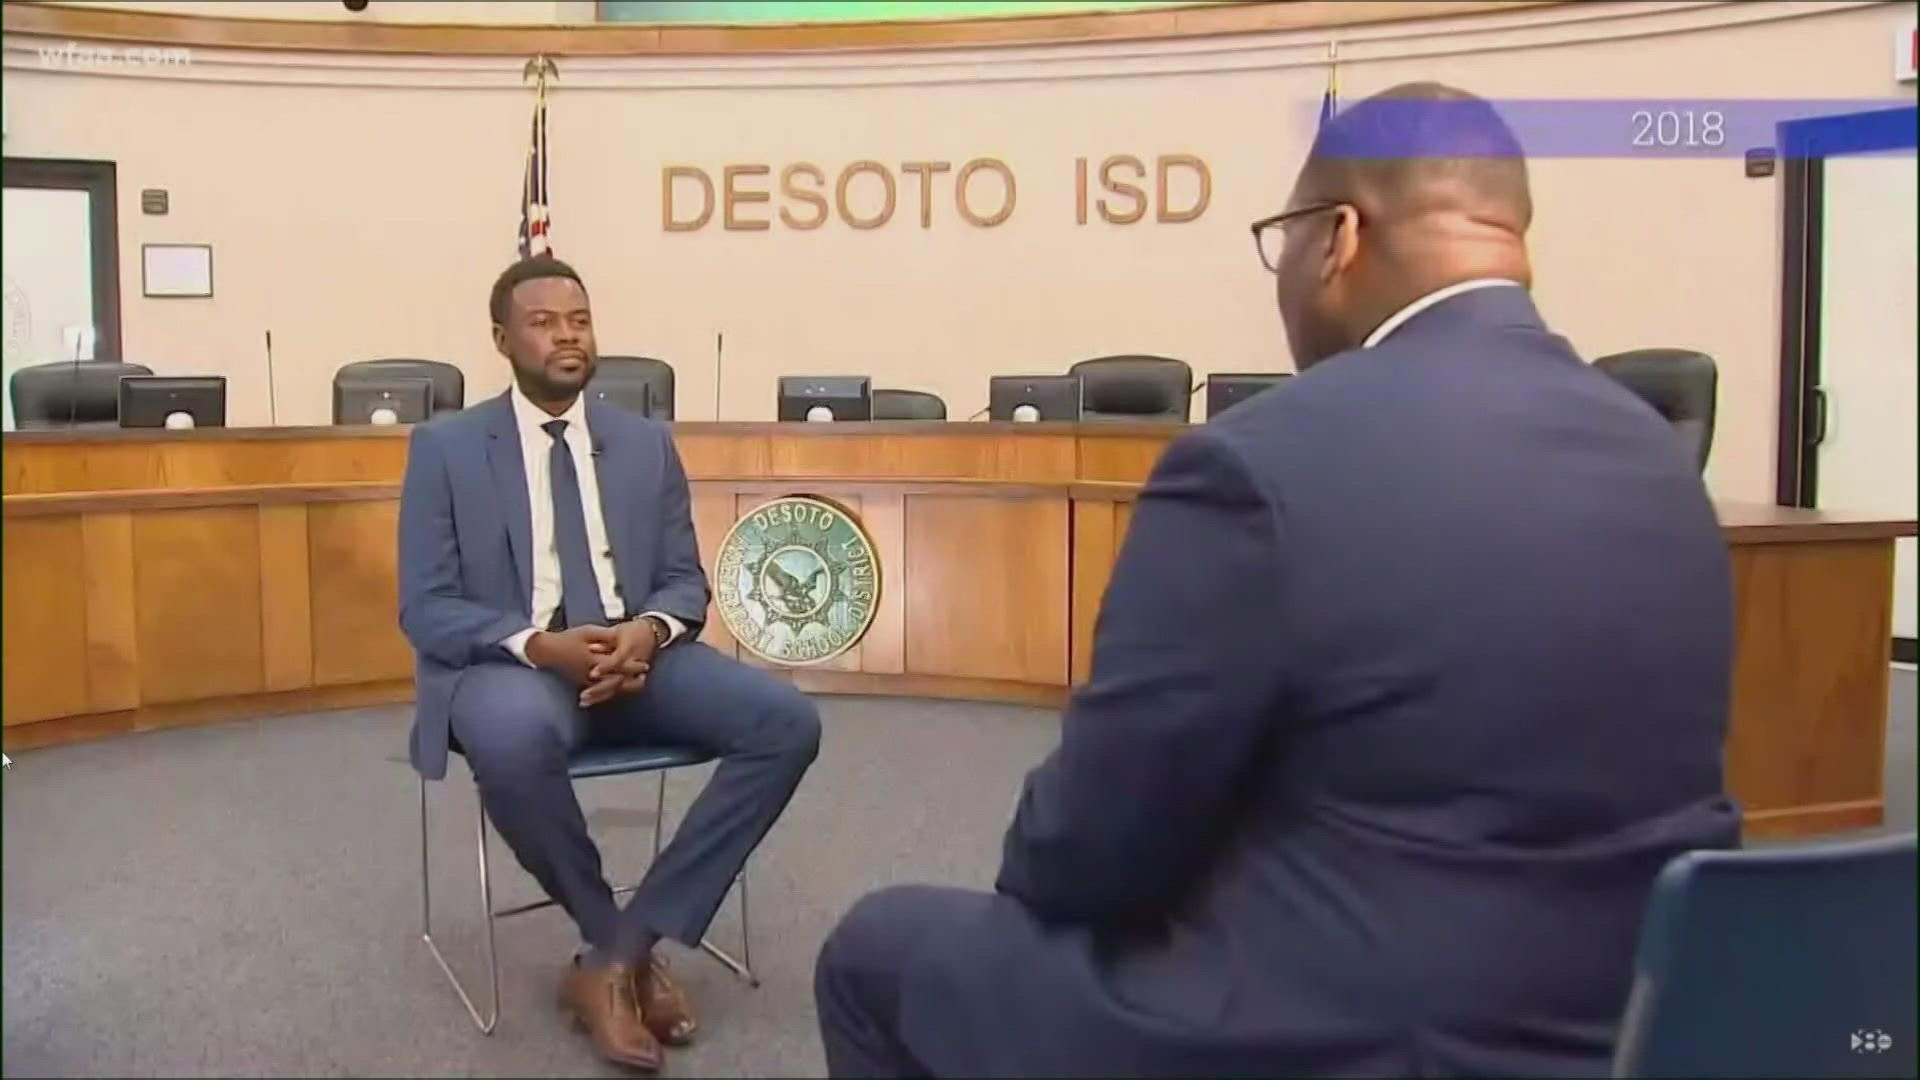 The DeSoto ISD Superintendent D'Andre Weaver submitted his resignation and Monday night the school board unanimously accepted it during a board meeting.